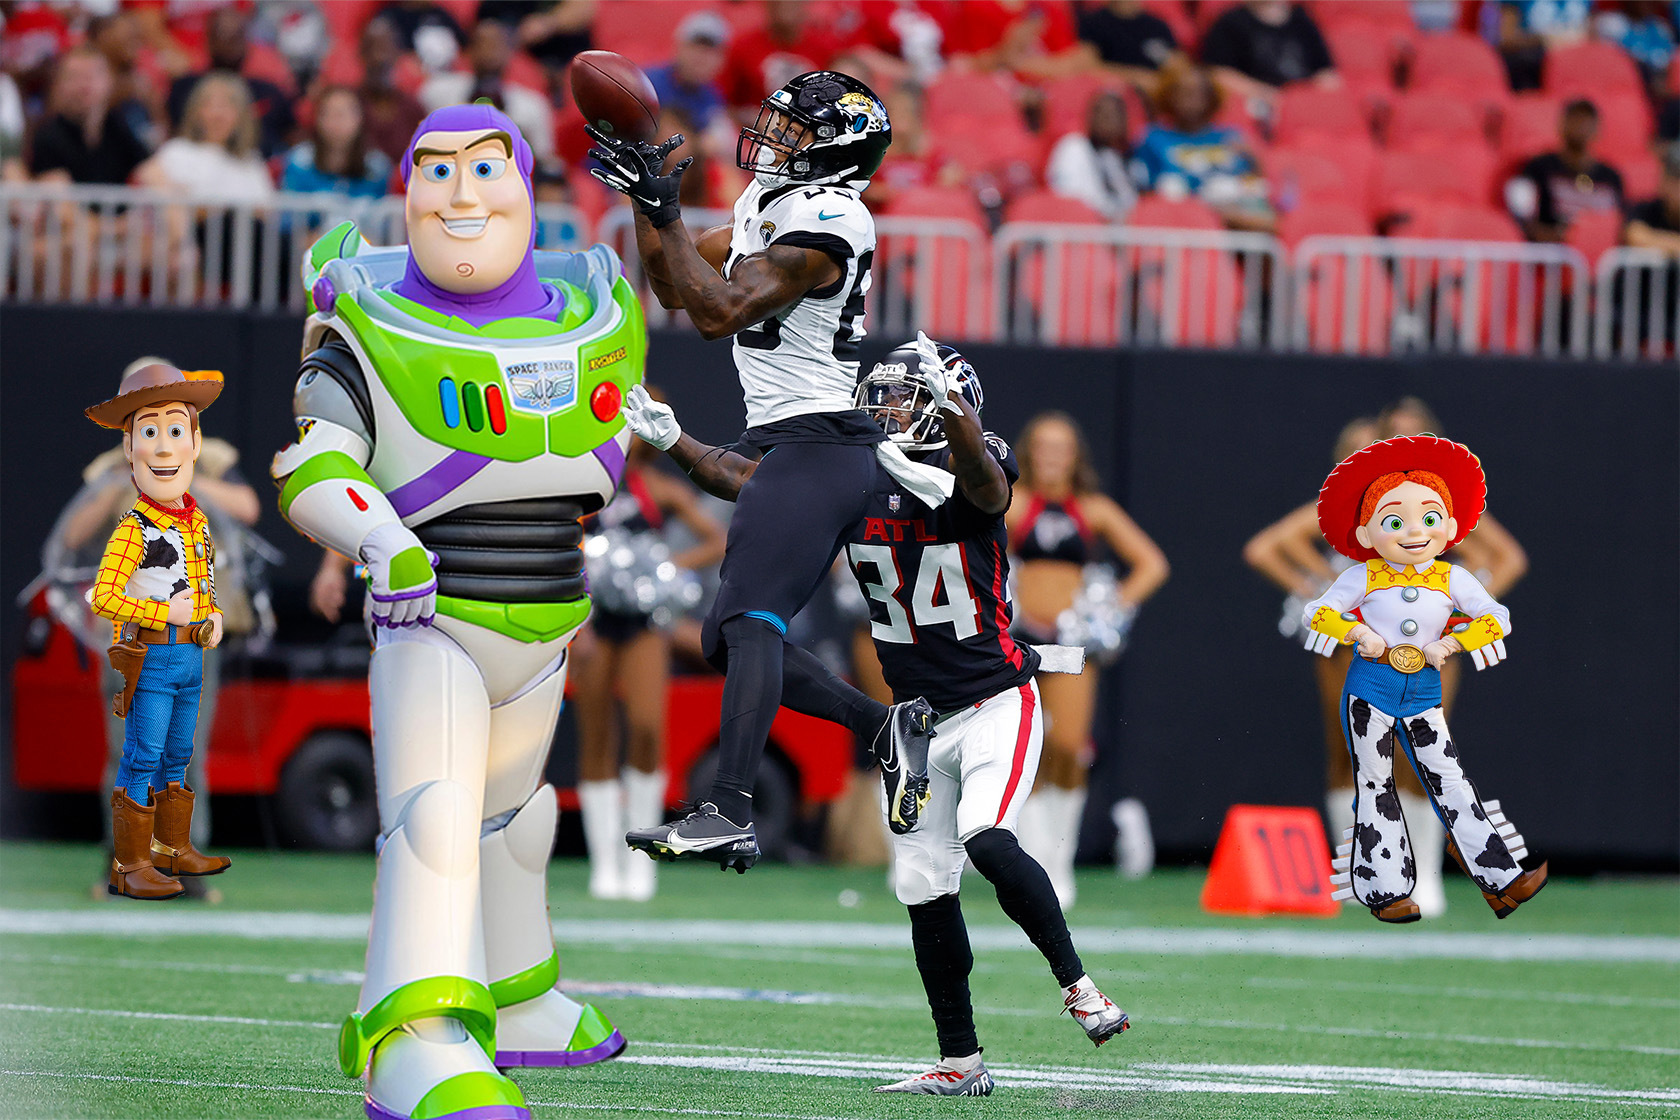 Here's how to watch 'Toy Story Funday Football' on Sunday